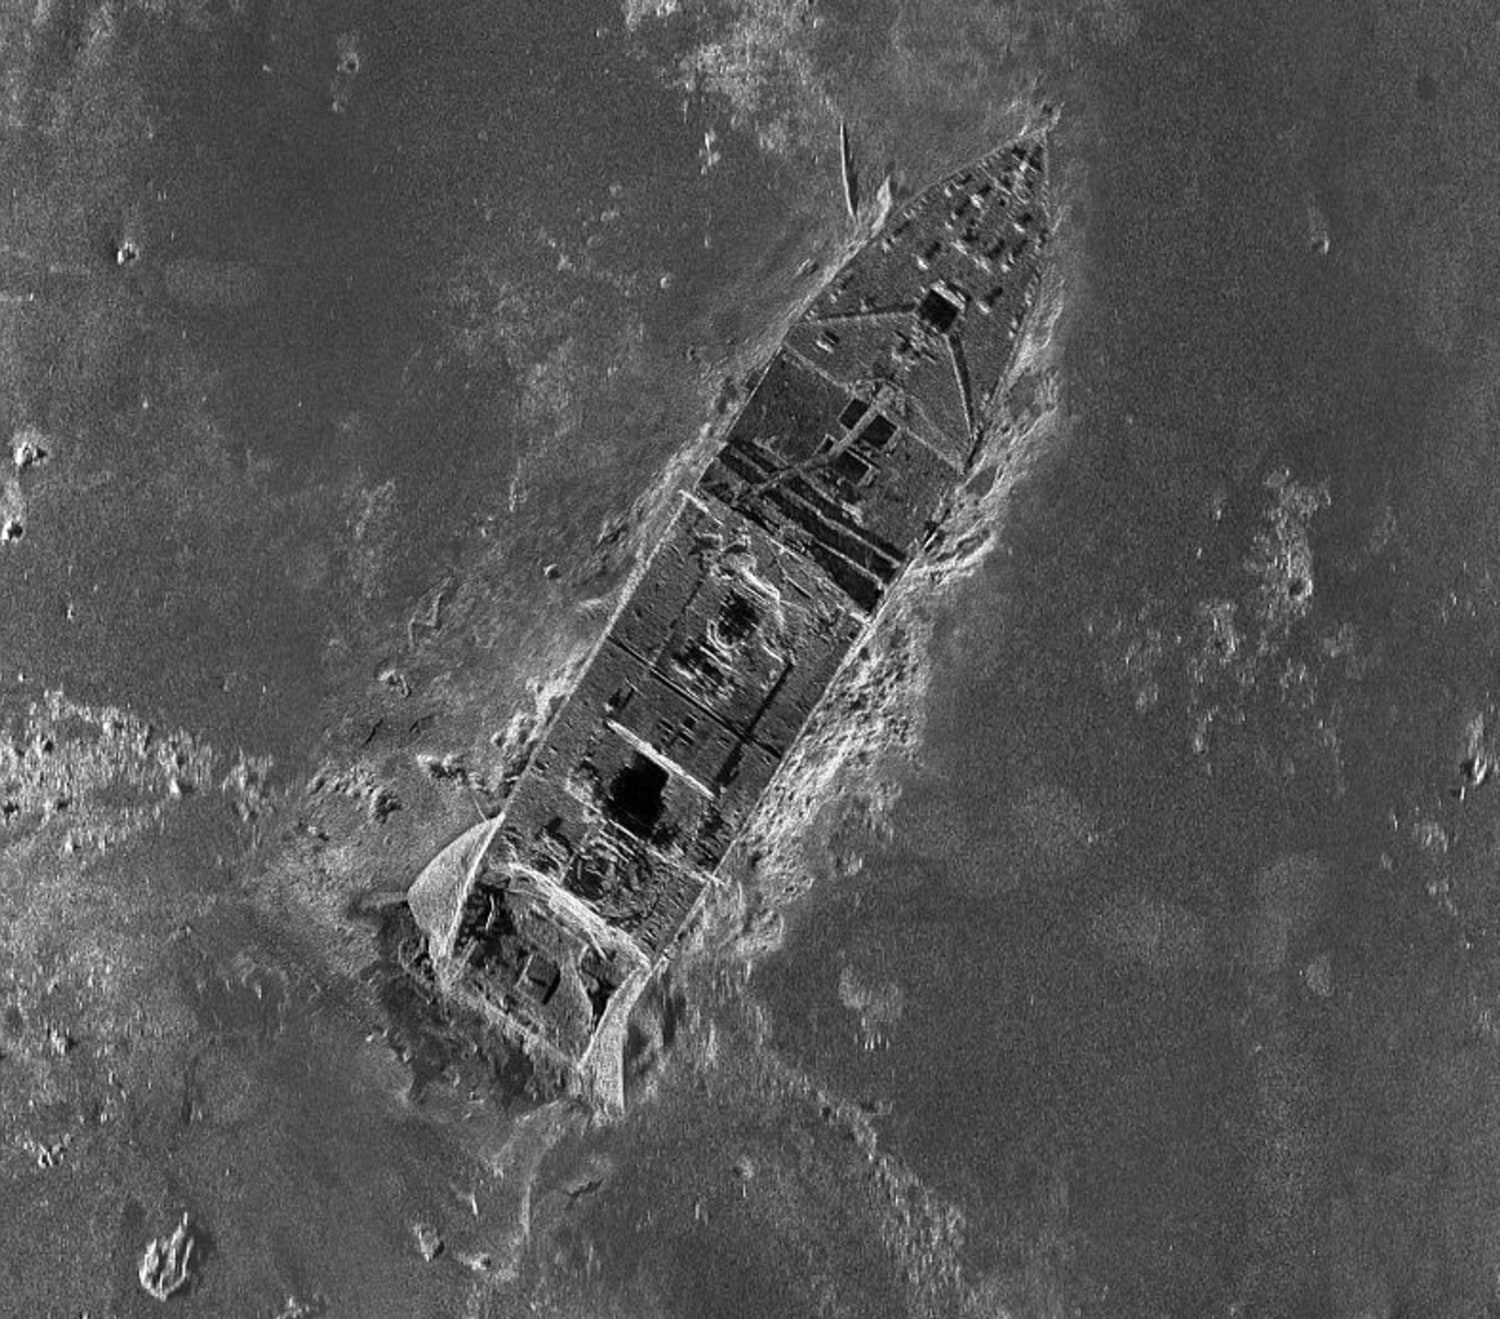 Full Titanic wreck site mapped for the first time